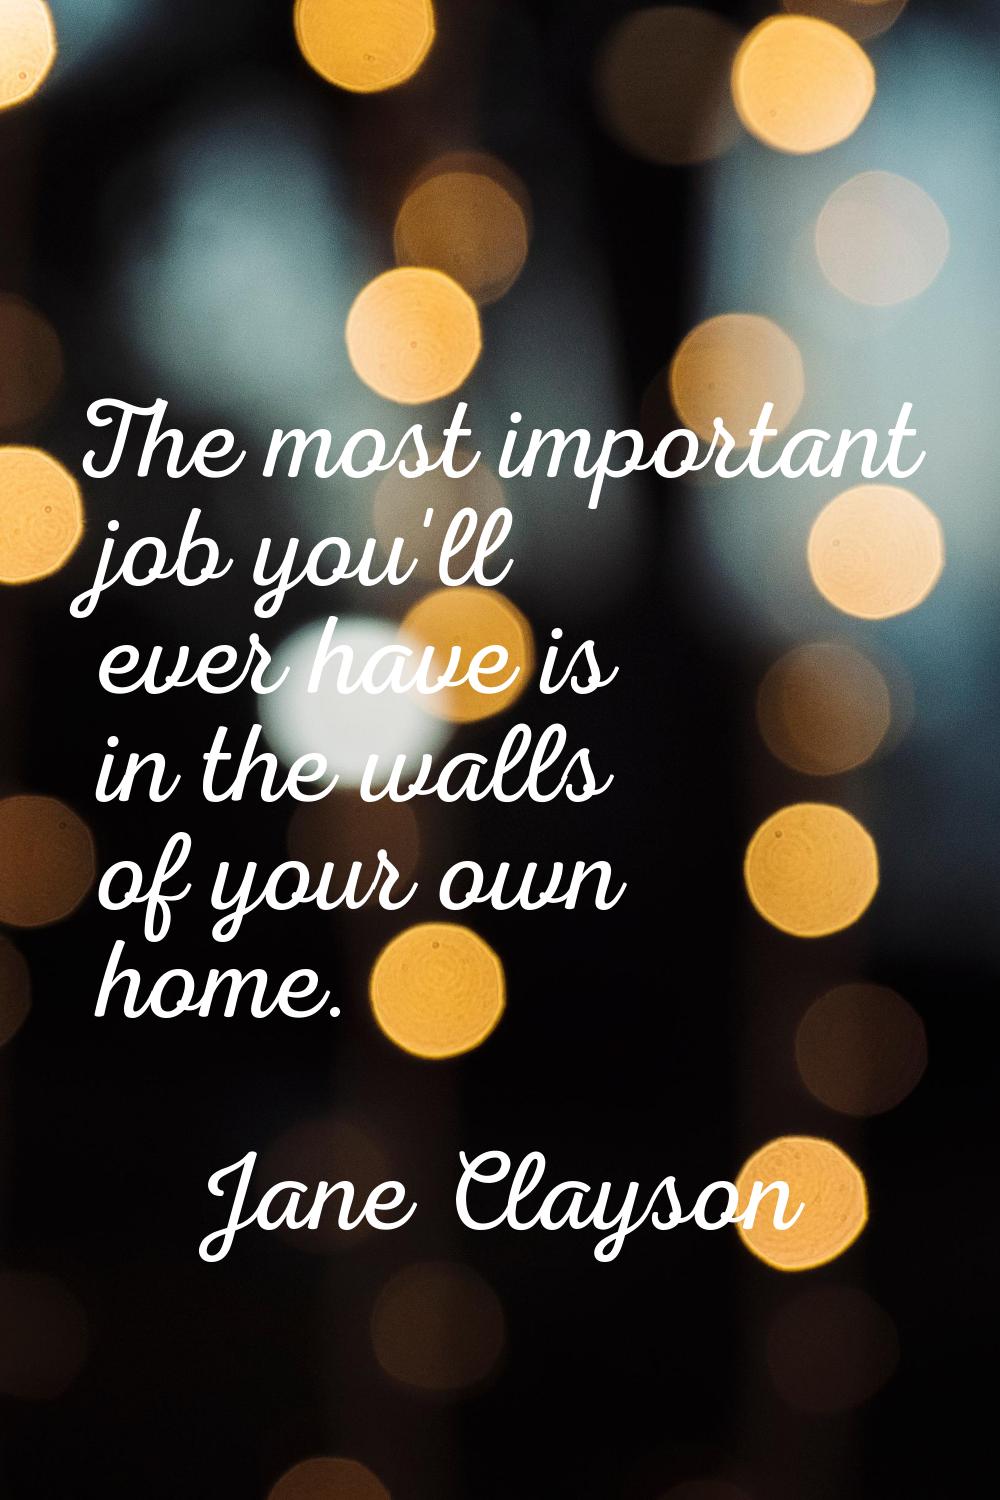 The most important job you'll ever have is in the walls of your own home.